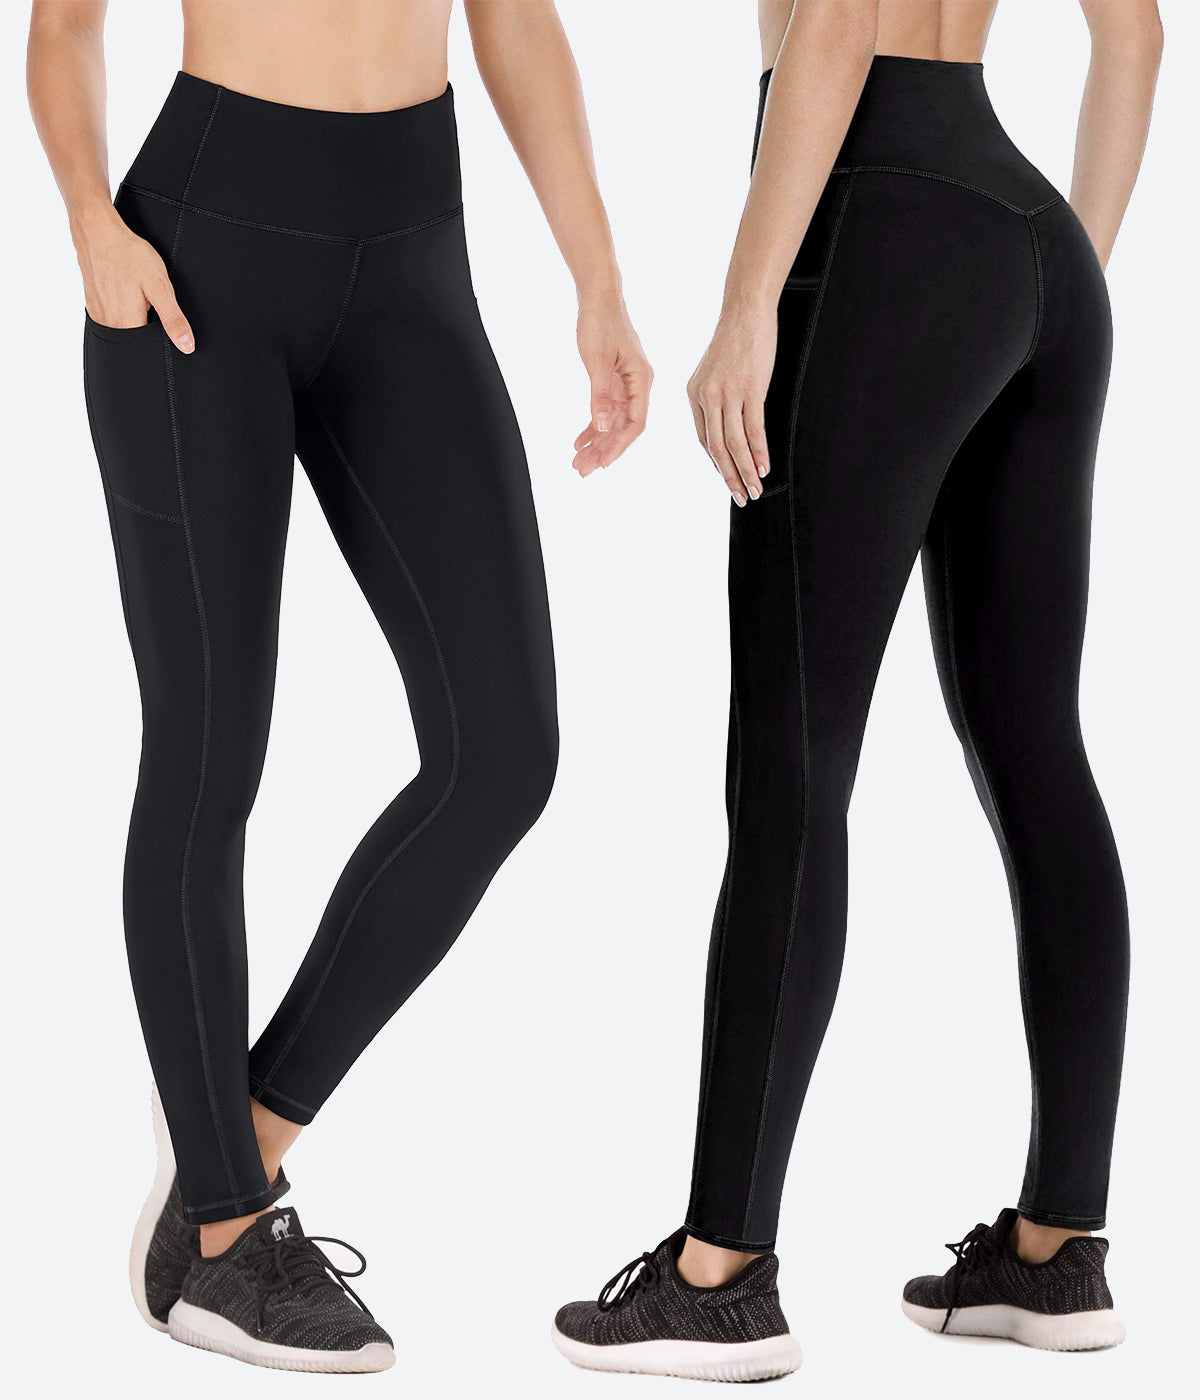 GAYHAY Fleece Lined Leggings with Pockets for Women - High Waisted Yoga  Pants Winter Warm Workout Leggings Reg & Plus Size Black